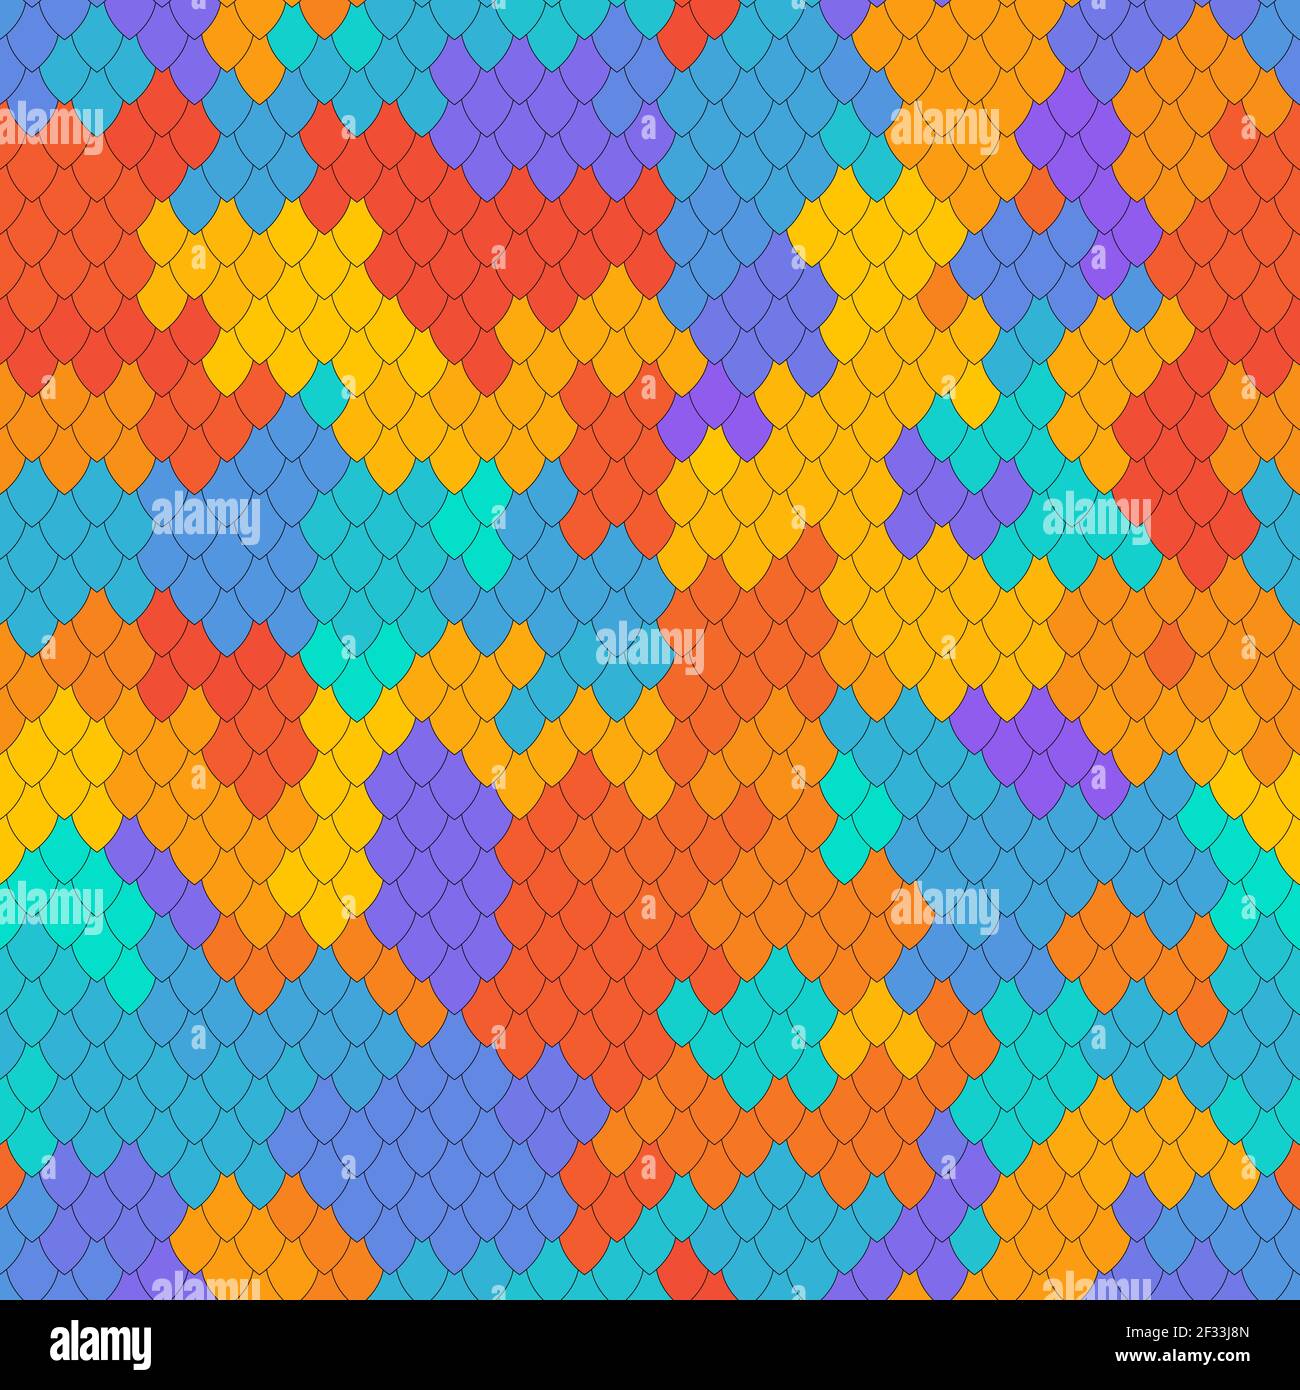 Abstract scale pattern. Rainbow squama texture. Colorful seamless pattern Stock Vector